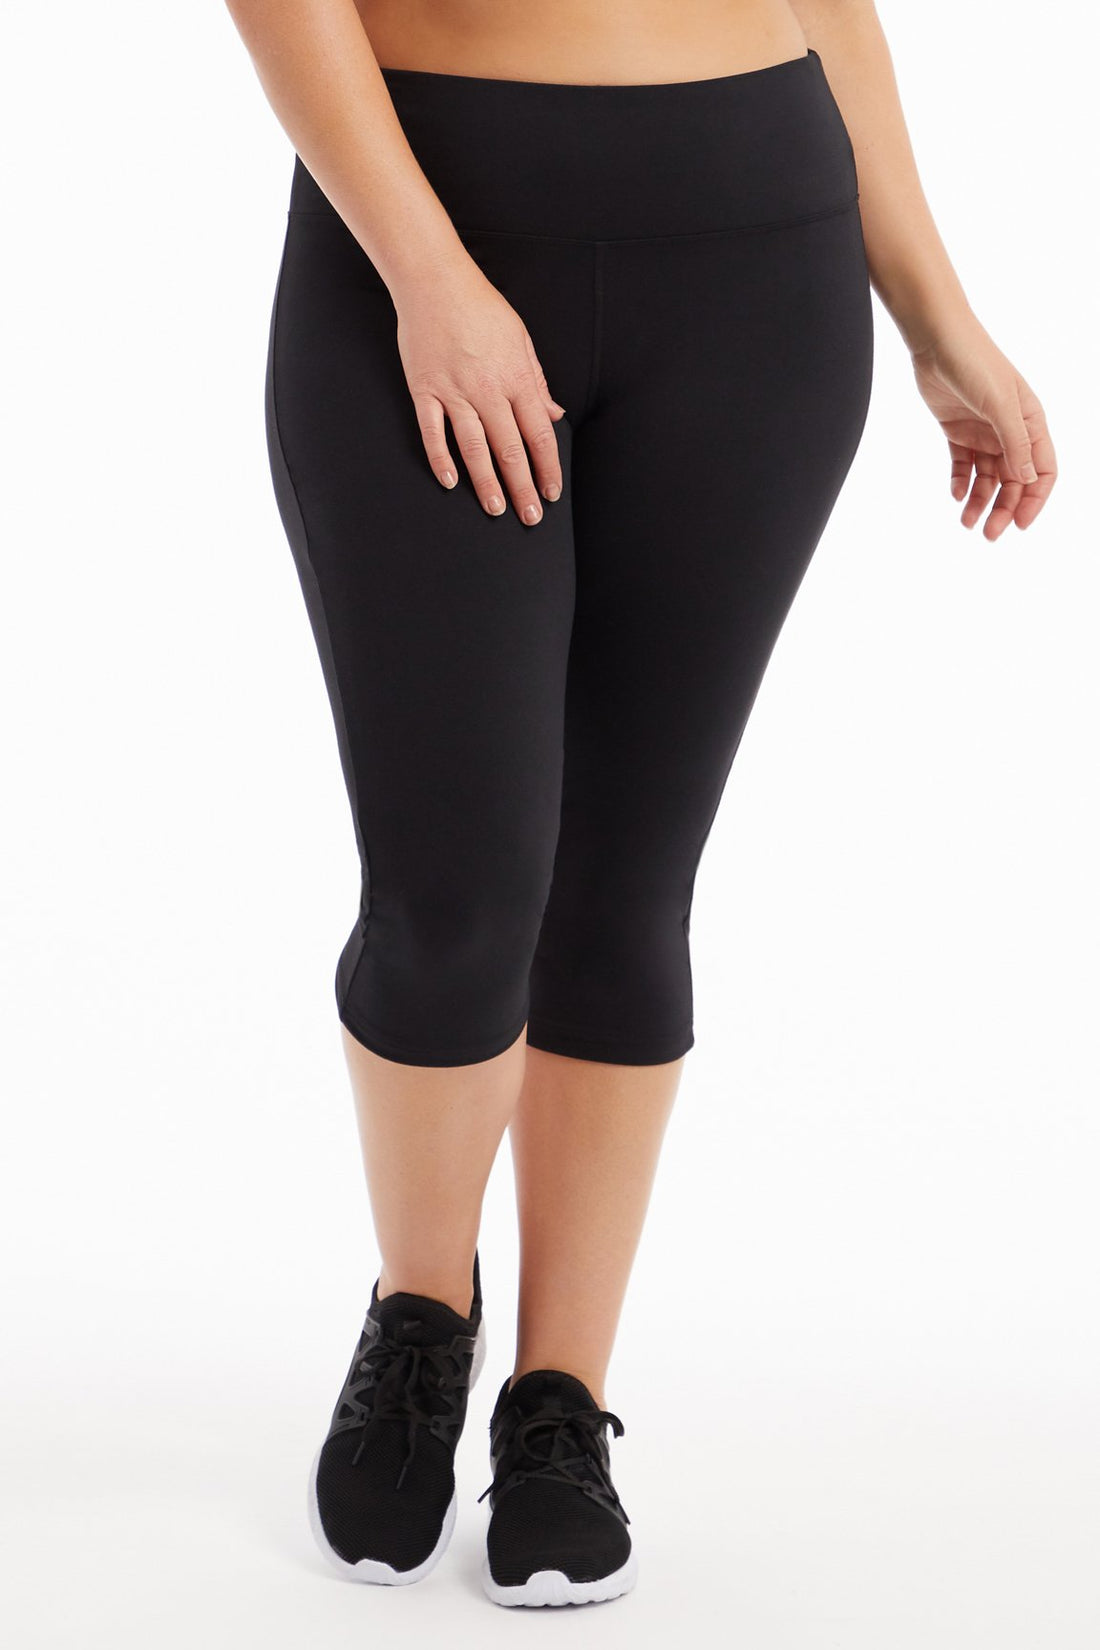 Marika Women's Plus Size Carrie Tummy Control Pant, Black, 3X at   Women's Clothing store